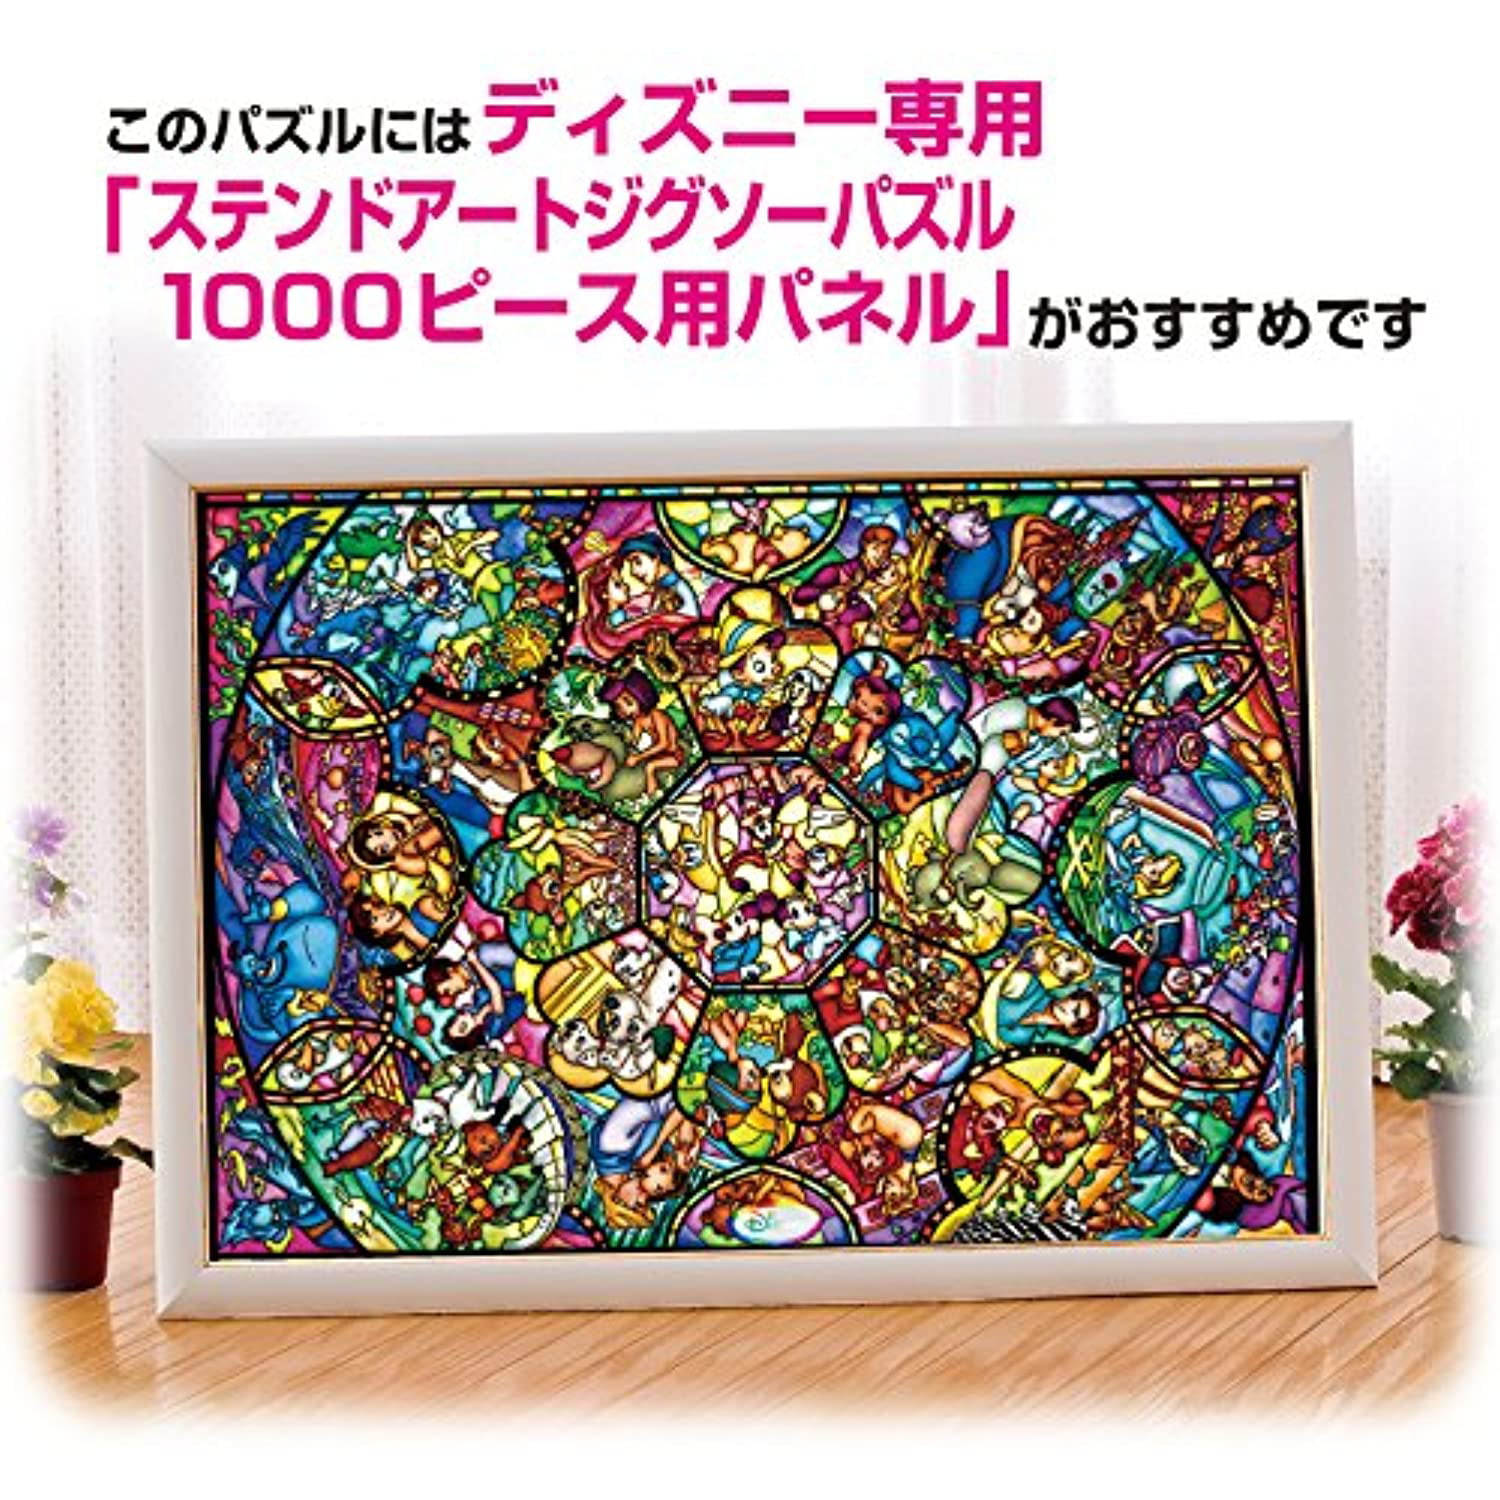 DS 771 Disney Stained Art Wishing to Starry Sky Jigsaw Puzzle 1000 PC Puzzles for sale online 